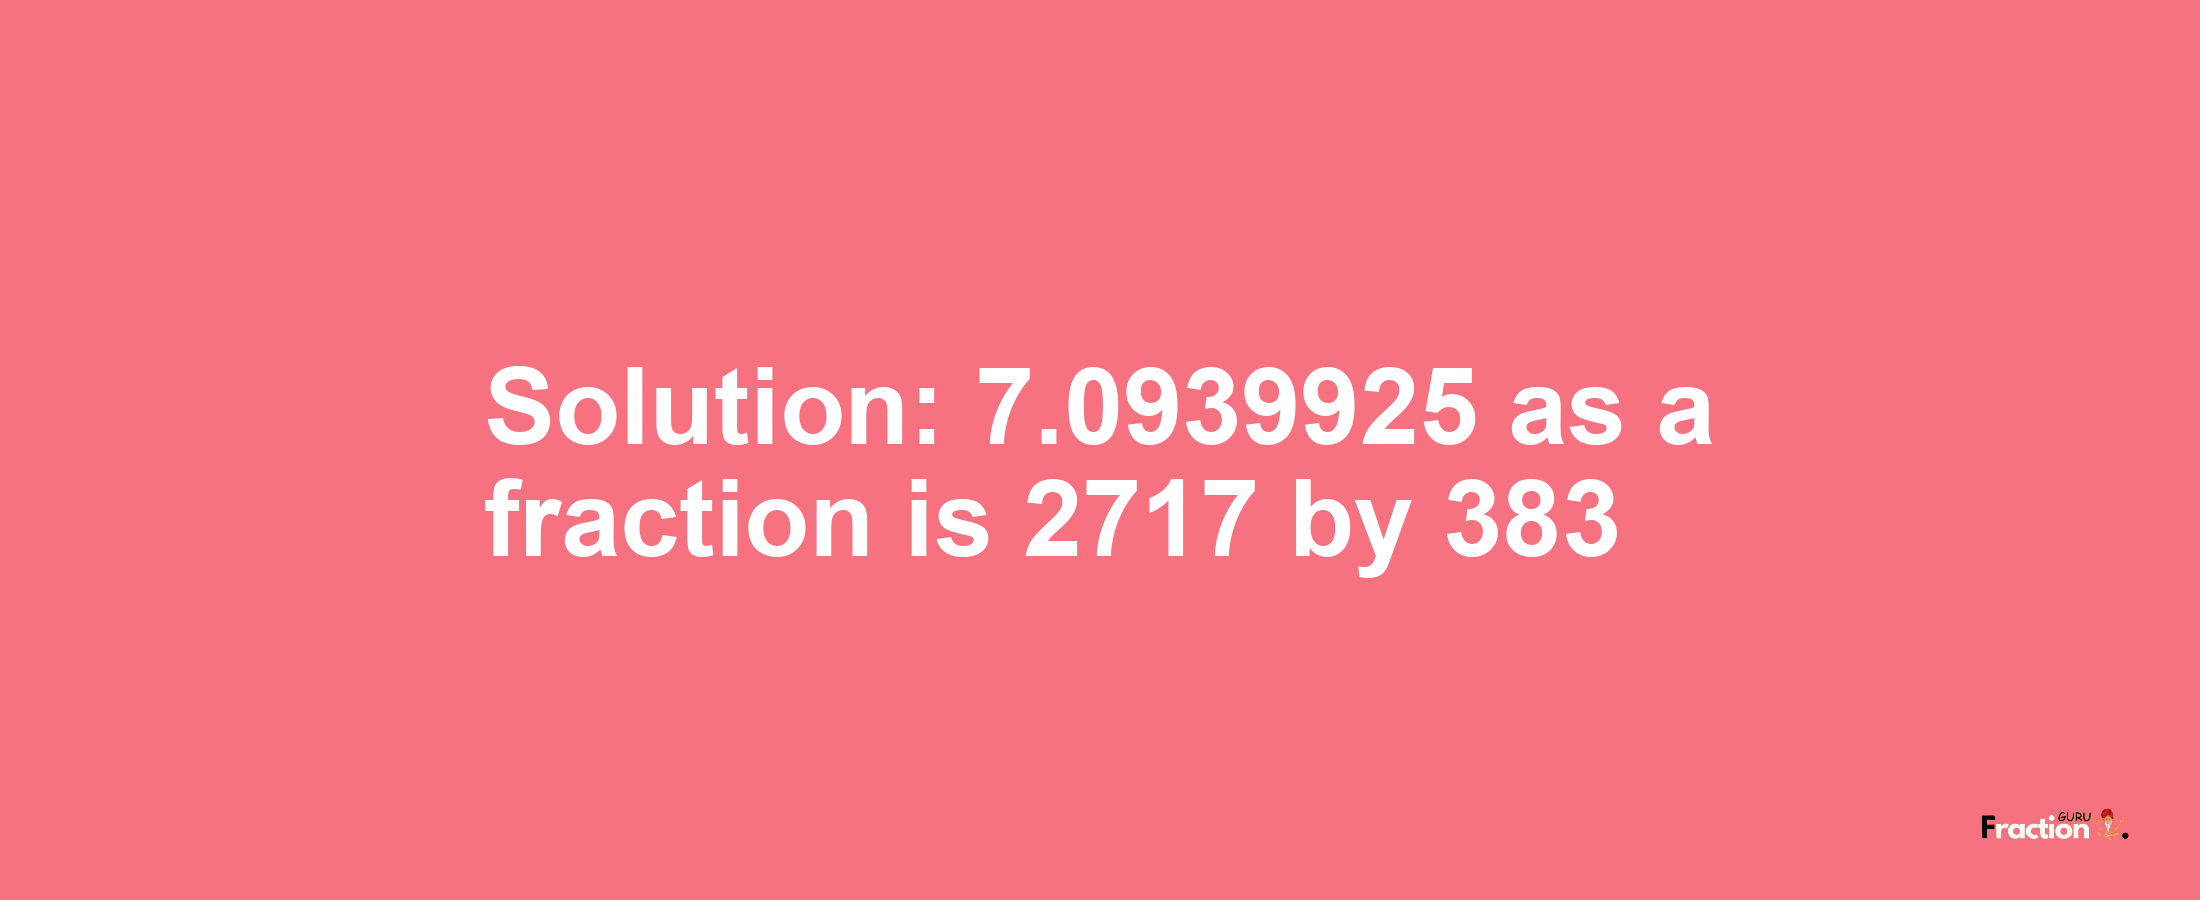 Solution:7.0939925 as a fraction is 2717/383